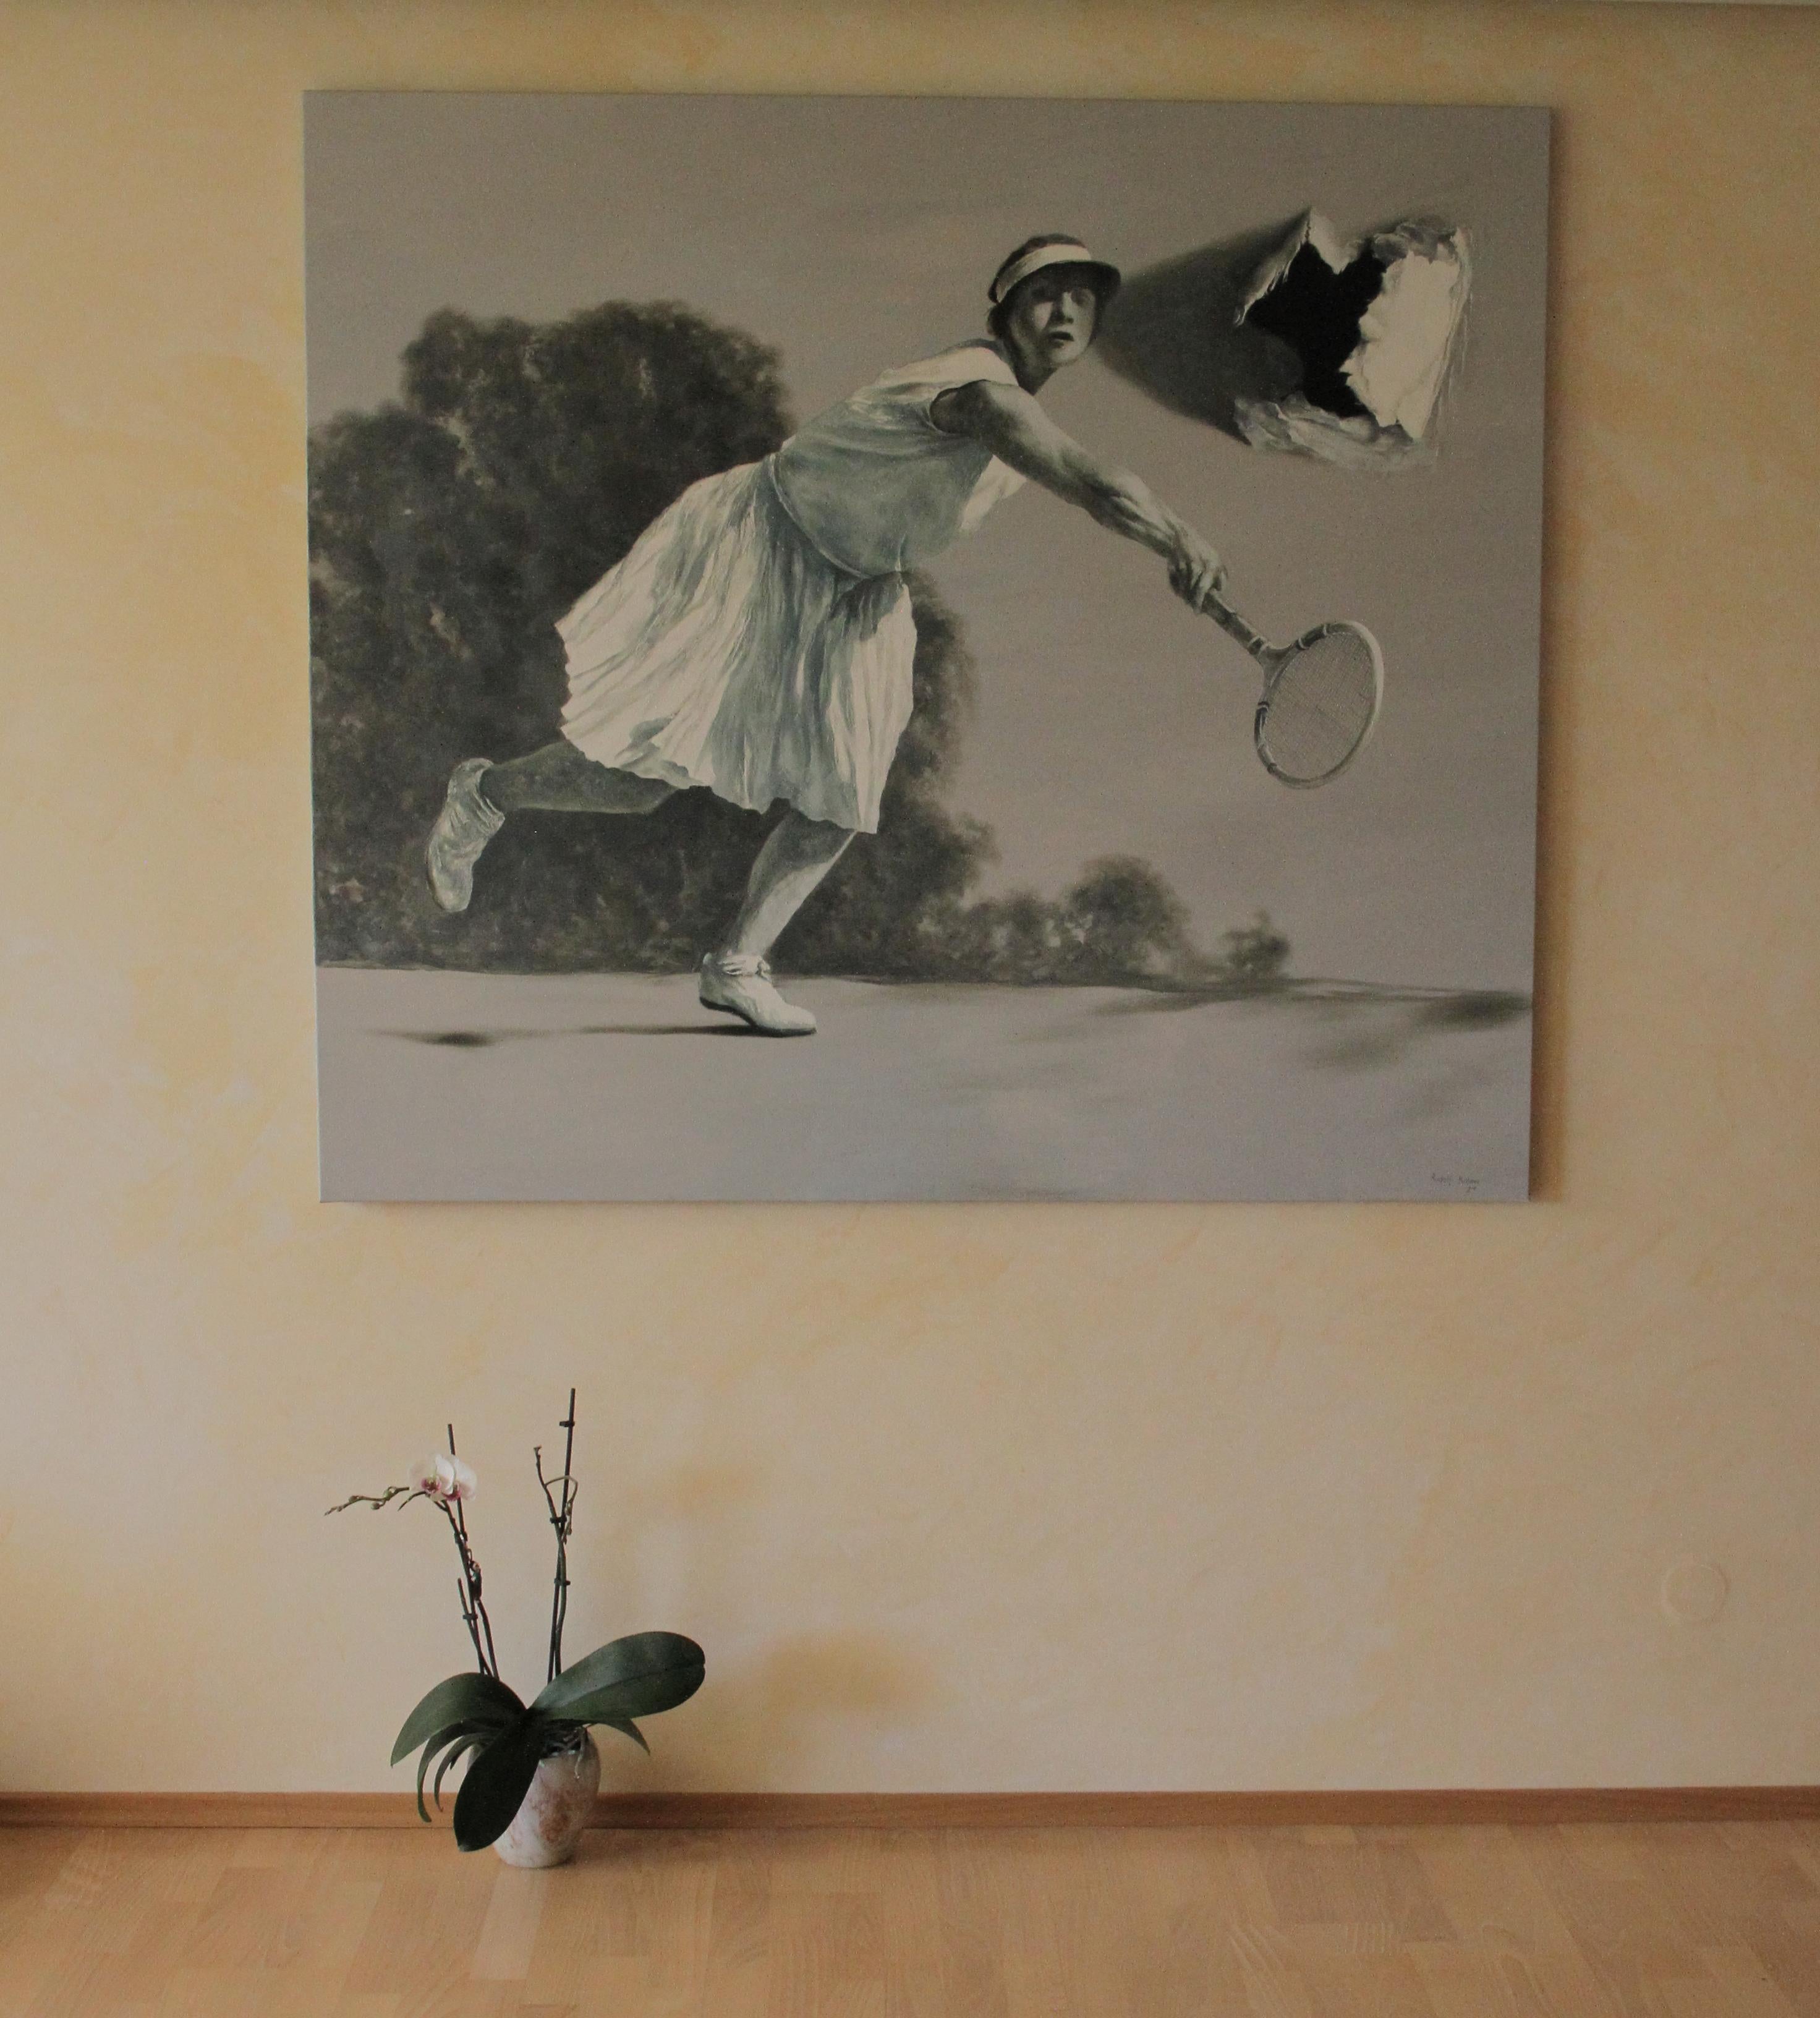 Instantly (woman tennis player vintage surrealist oil painting monochrome grey) - Painting by Rudolf Kosow